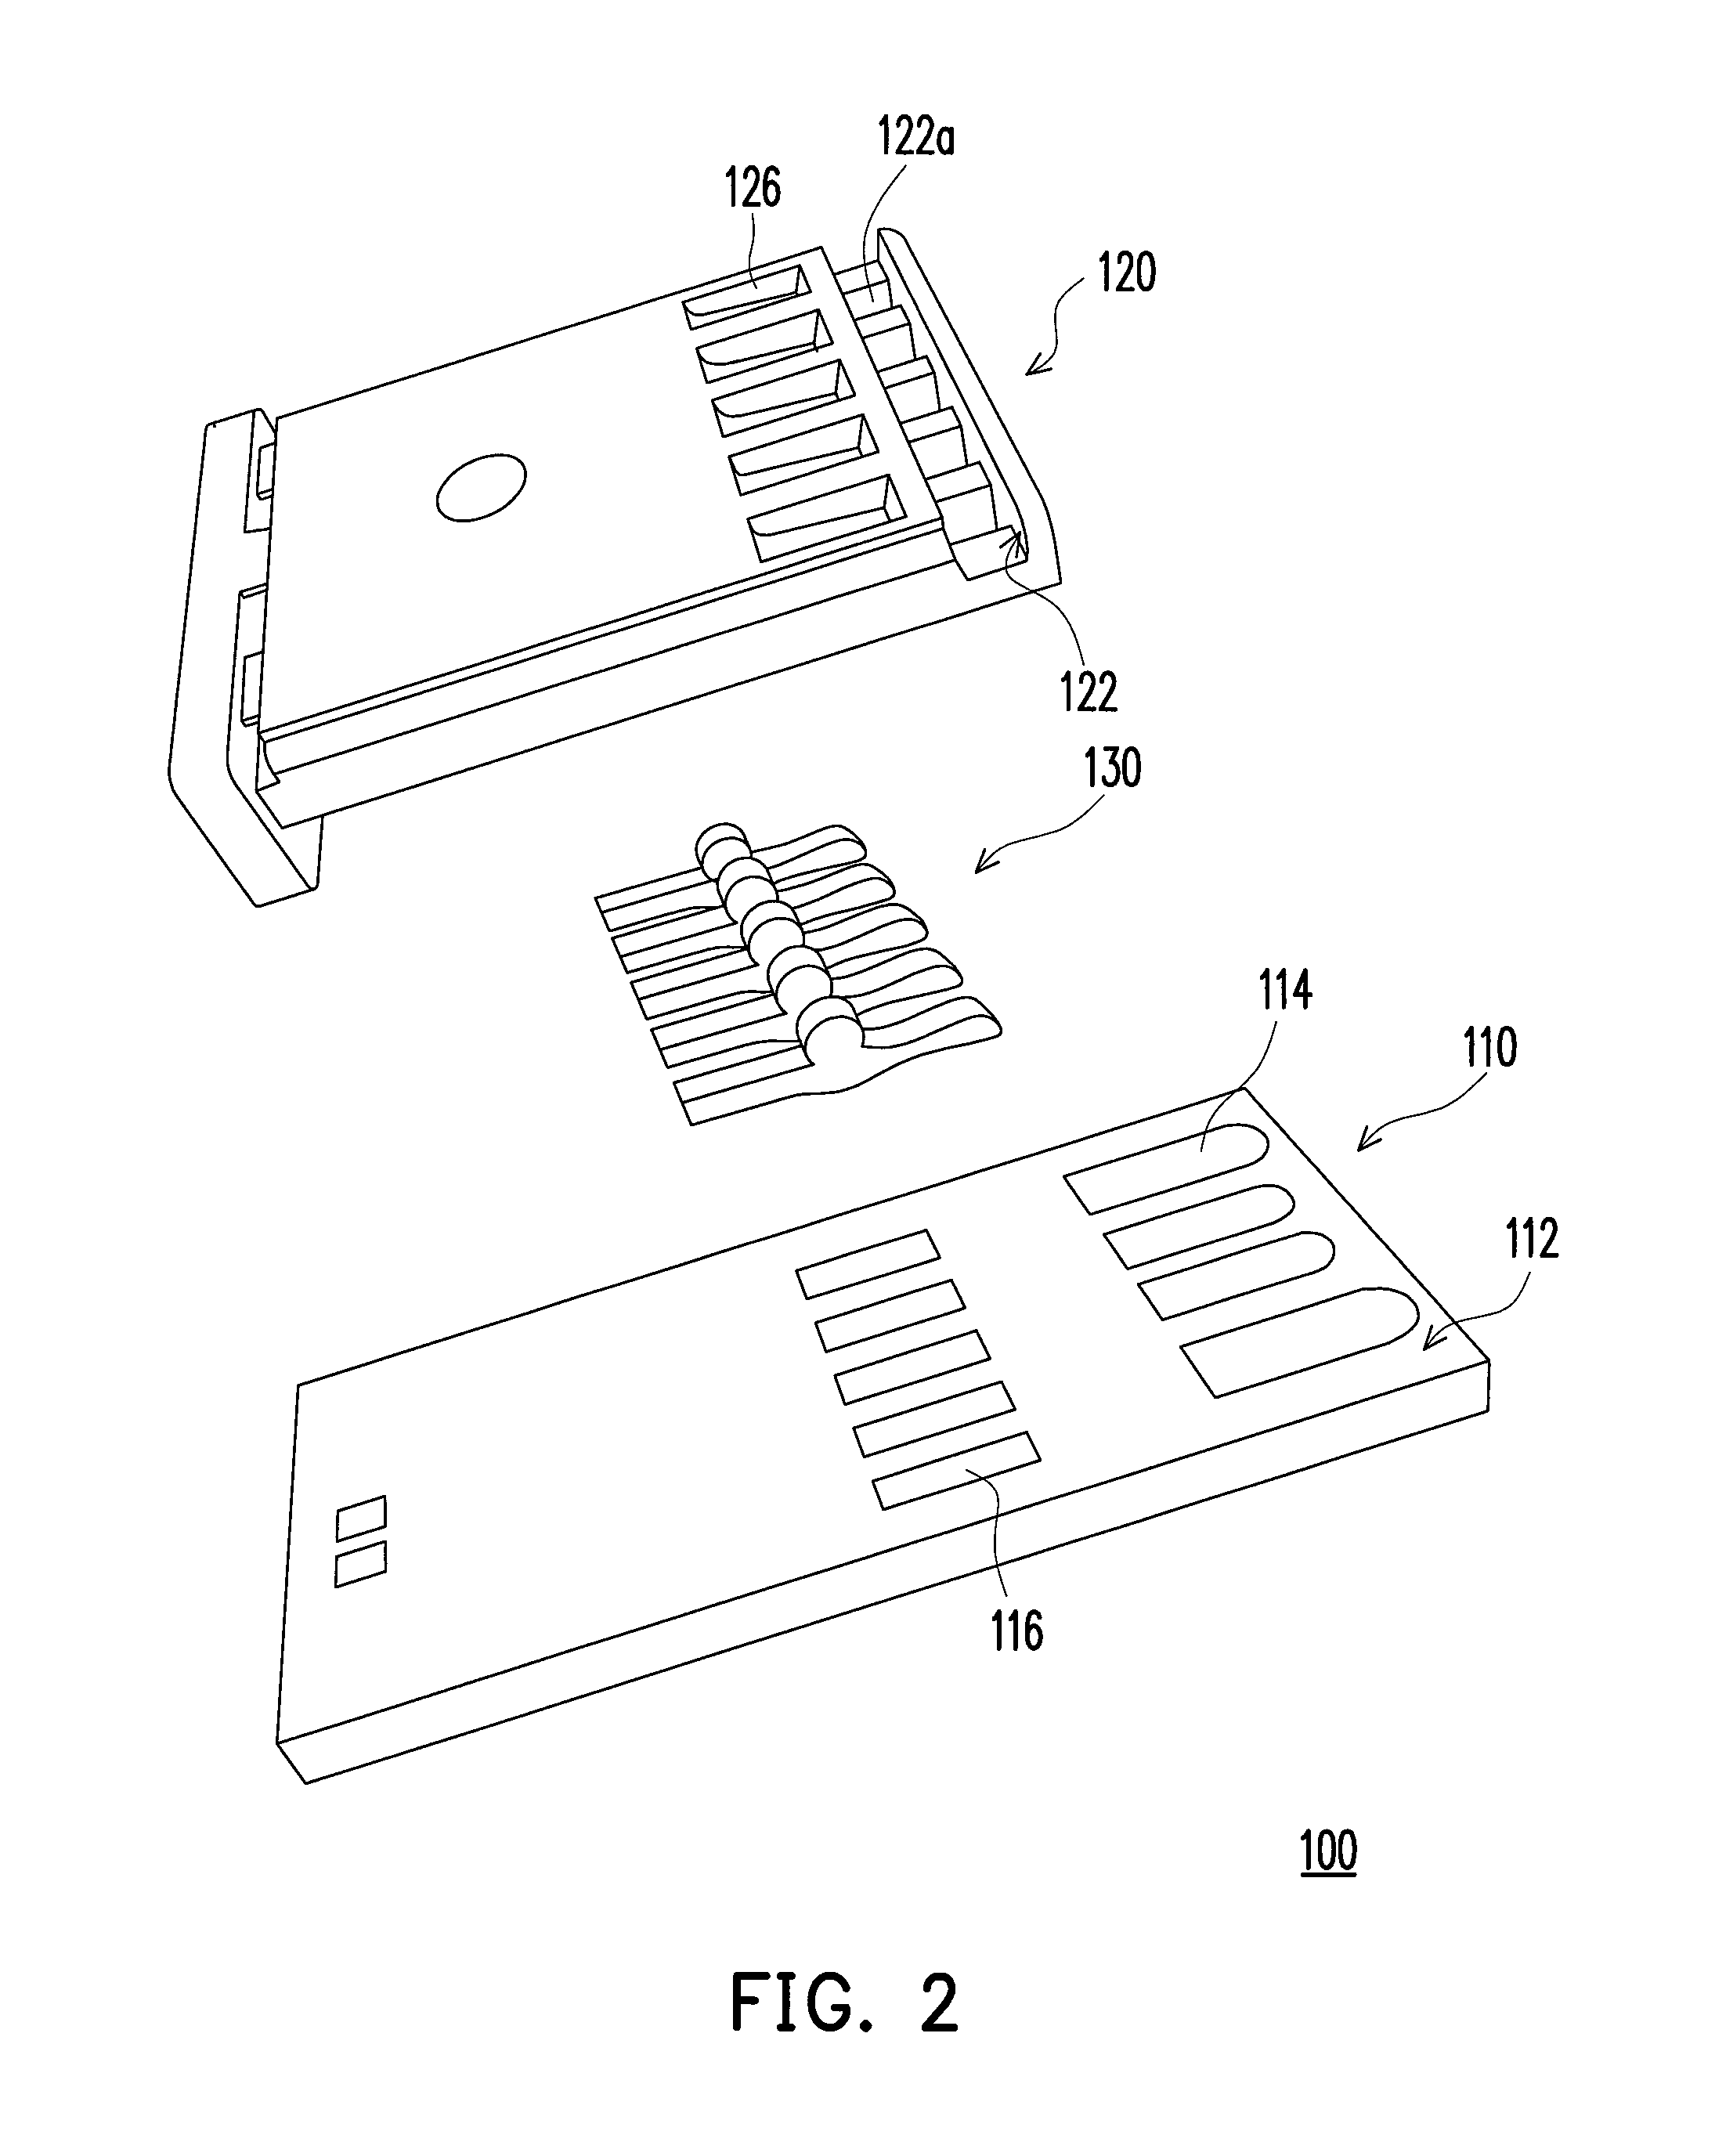 Conductive terminal with a central bulged portion configured for swinging relative to a base material